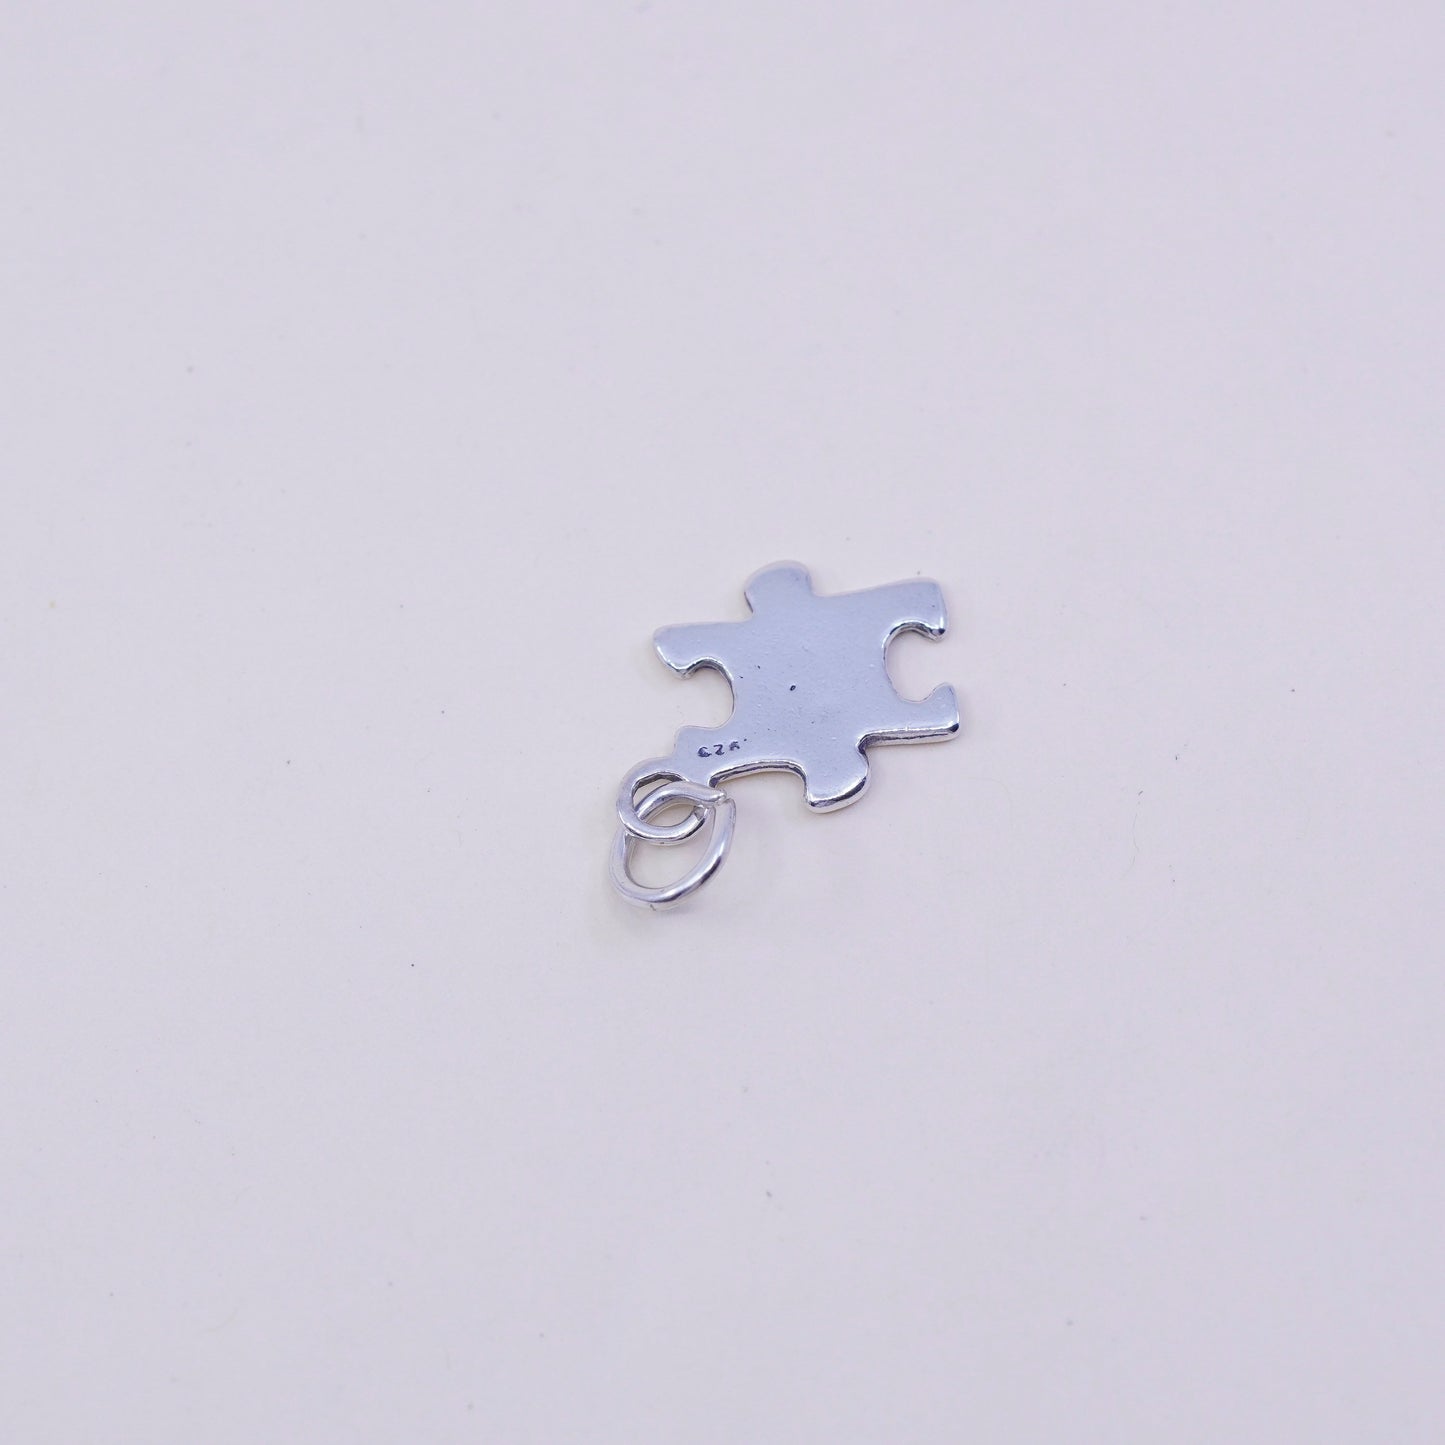 Vintage 925 sterling silver handmade puzzle charm, stamped 925